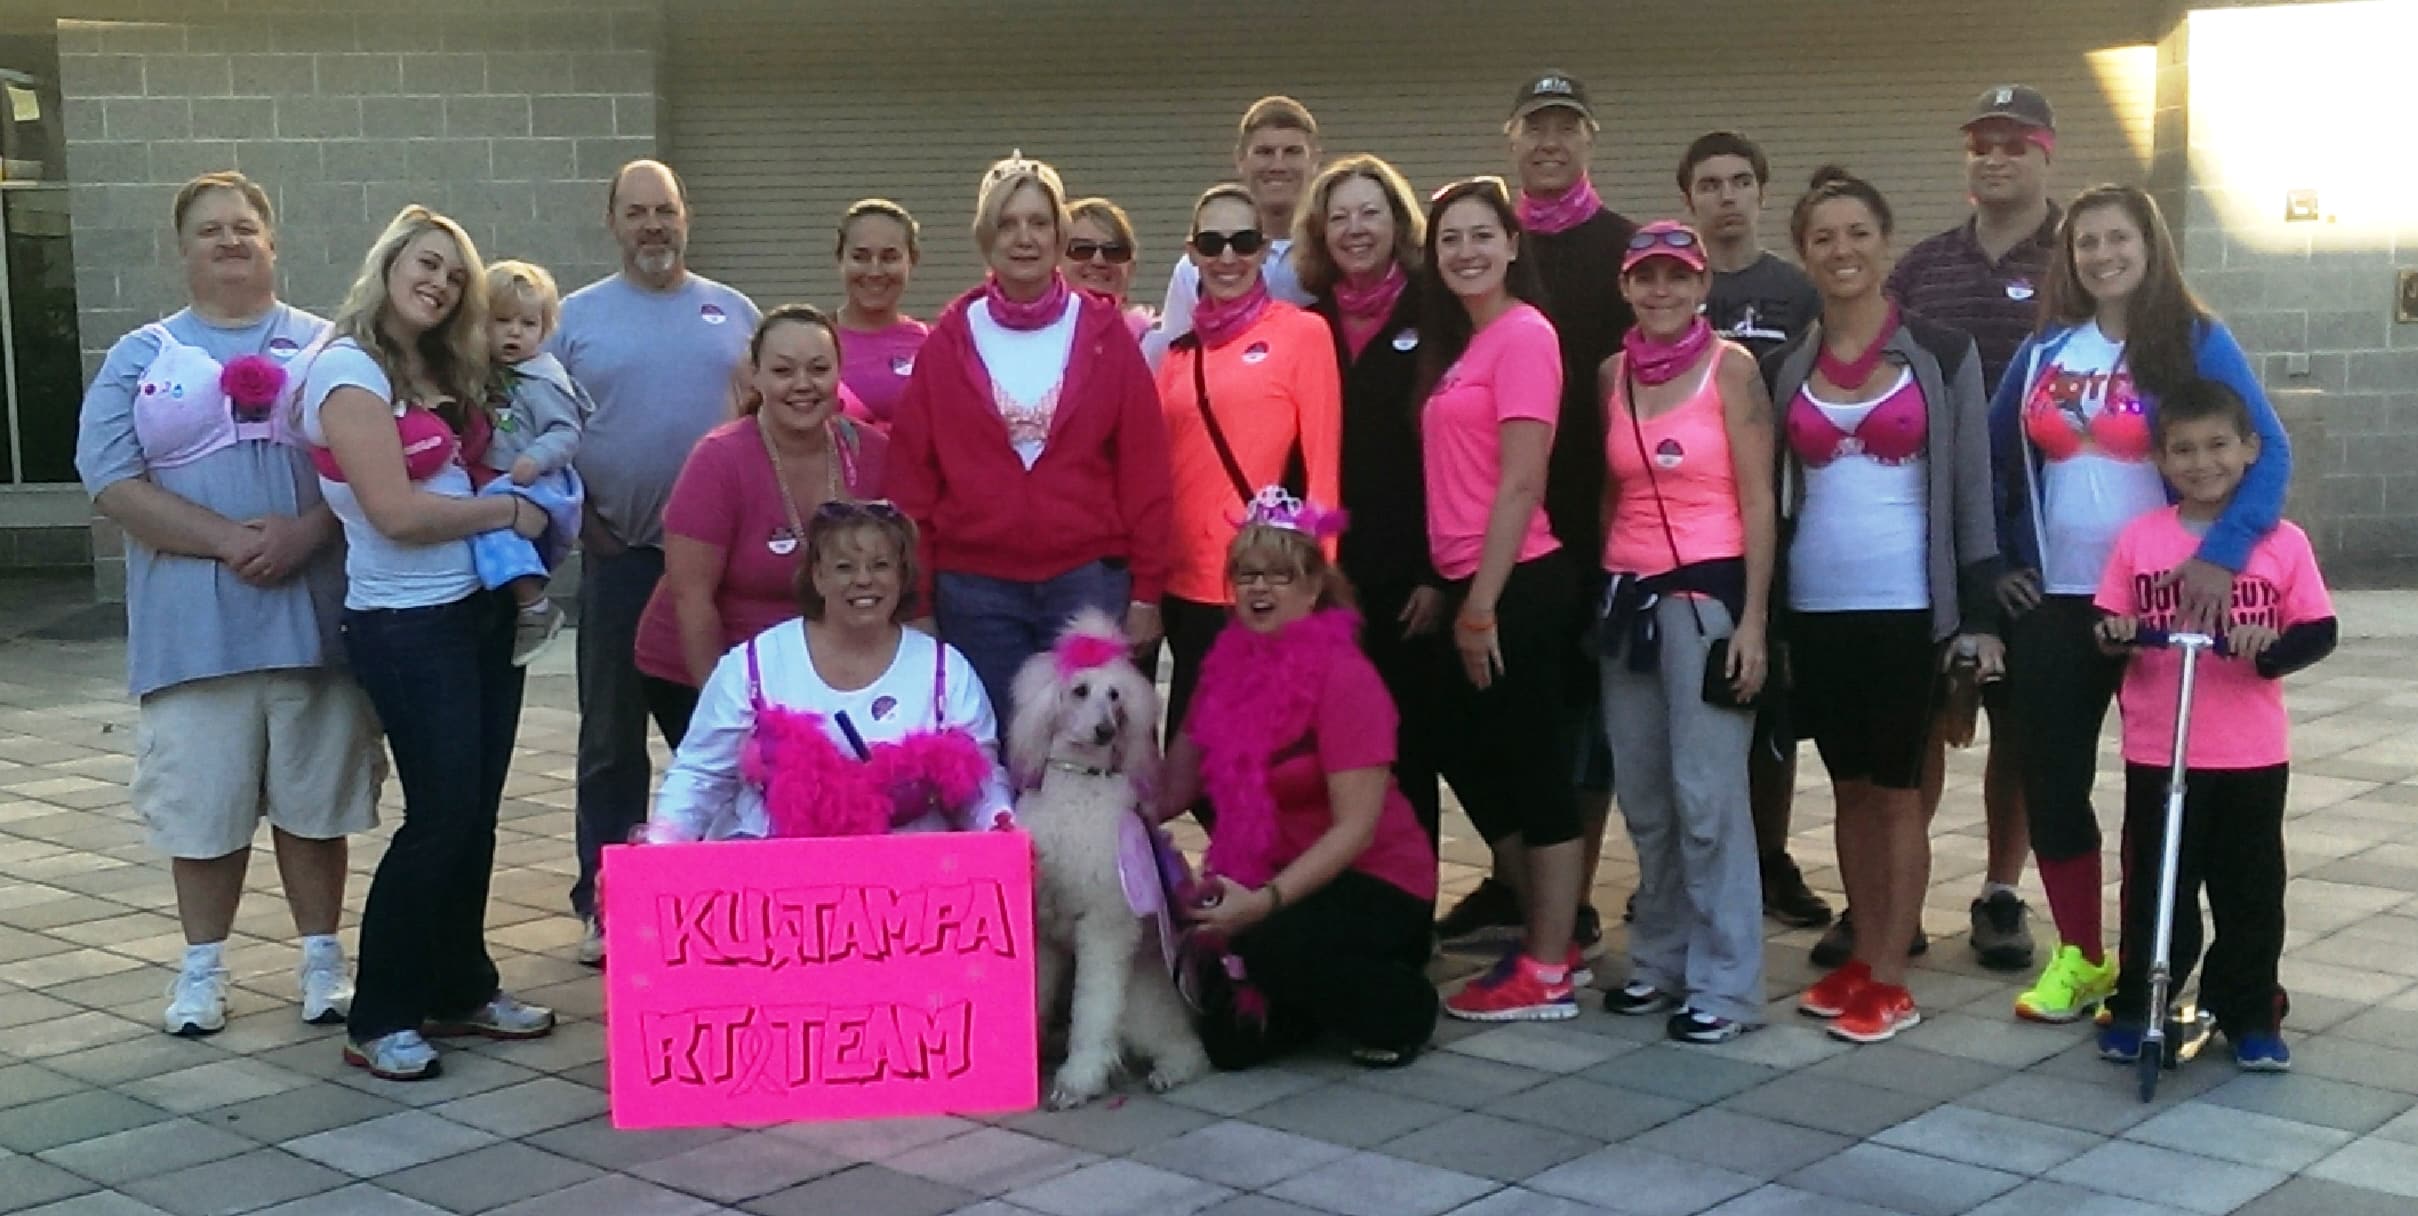 Radiology Students and Faculty at the Tampa Campus Raised Funds for Breast Cancer Research